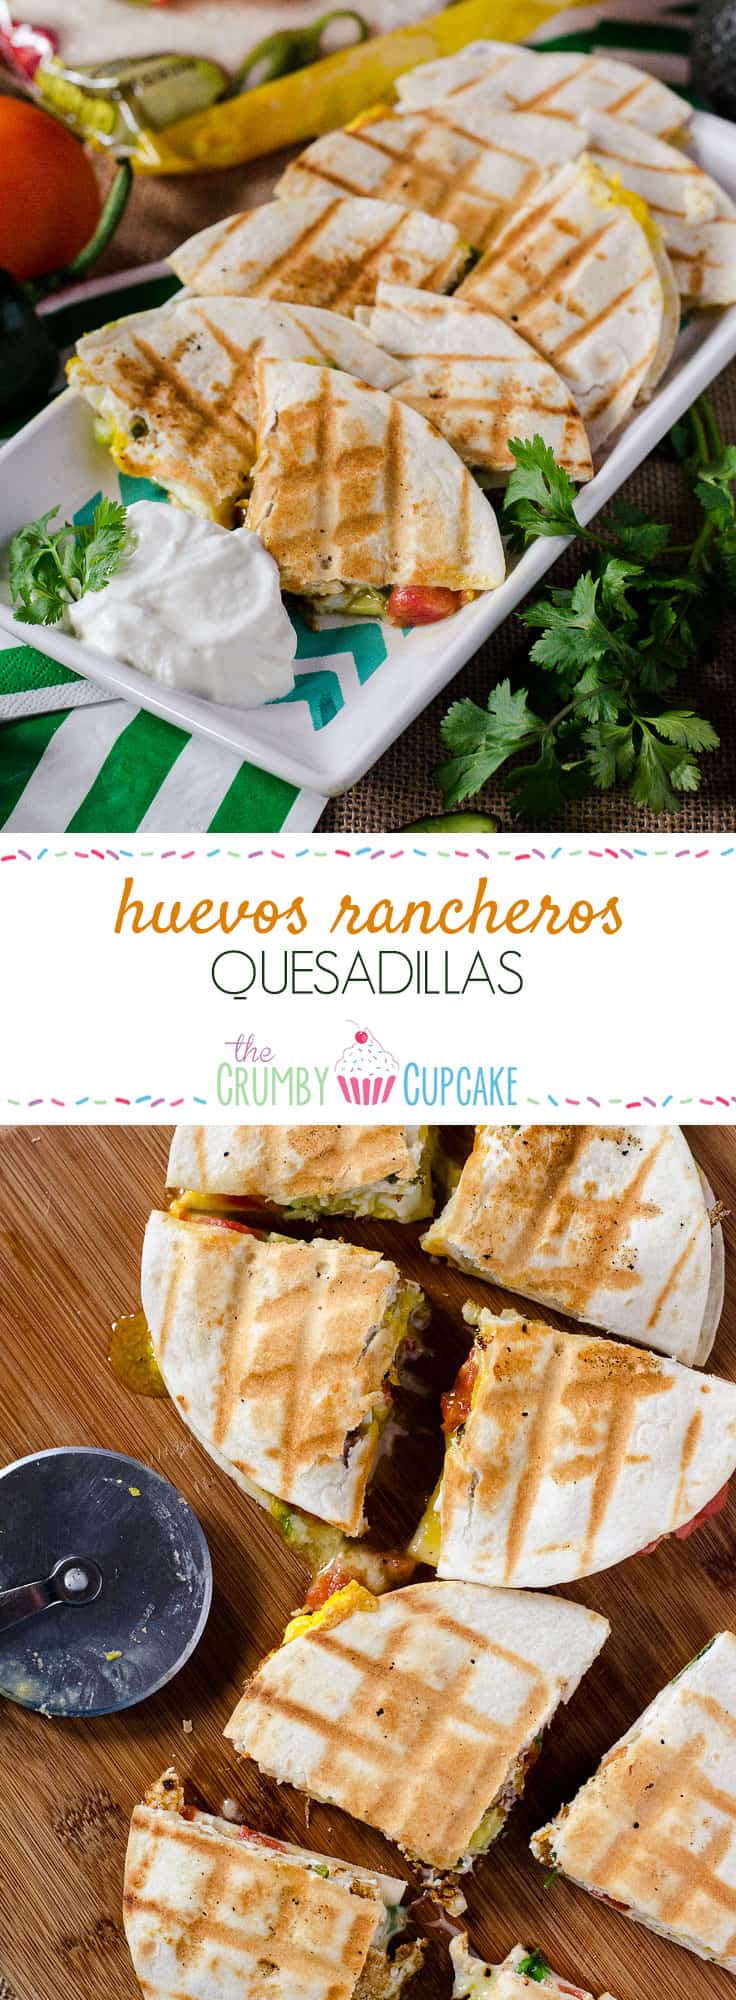 Huevos Rancheros Quesadillas | Go team avocado! This party-style take on a popular Mexican breakfast dish is loaded with green goodness, and begging to be served up for The Big Game.